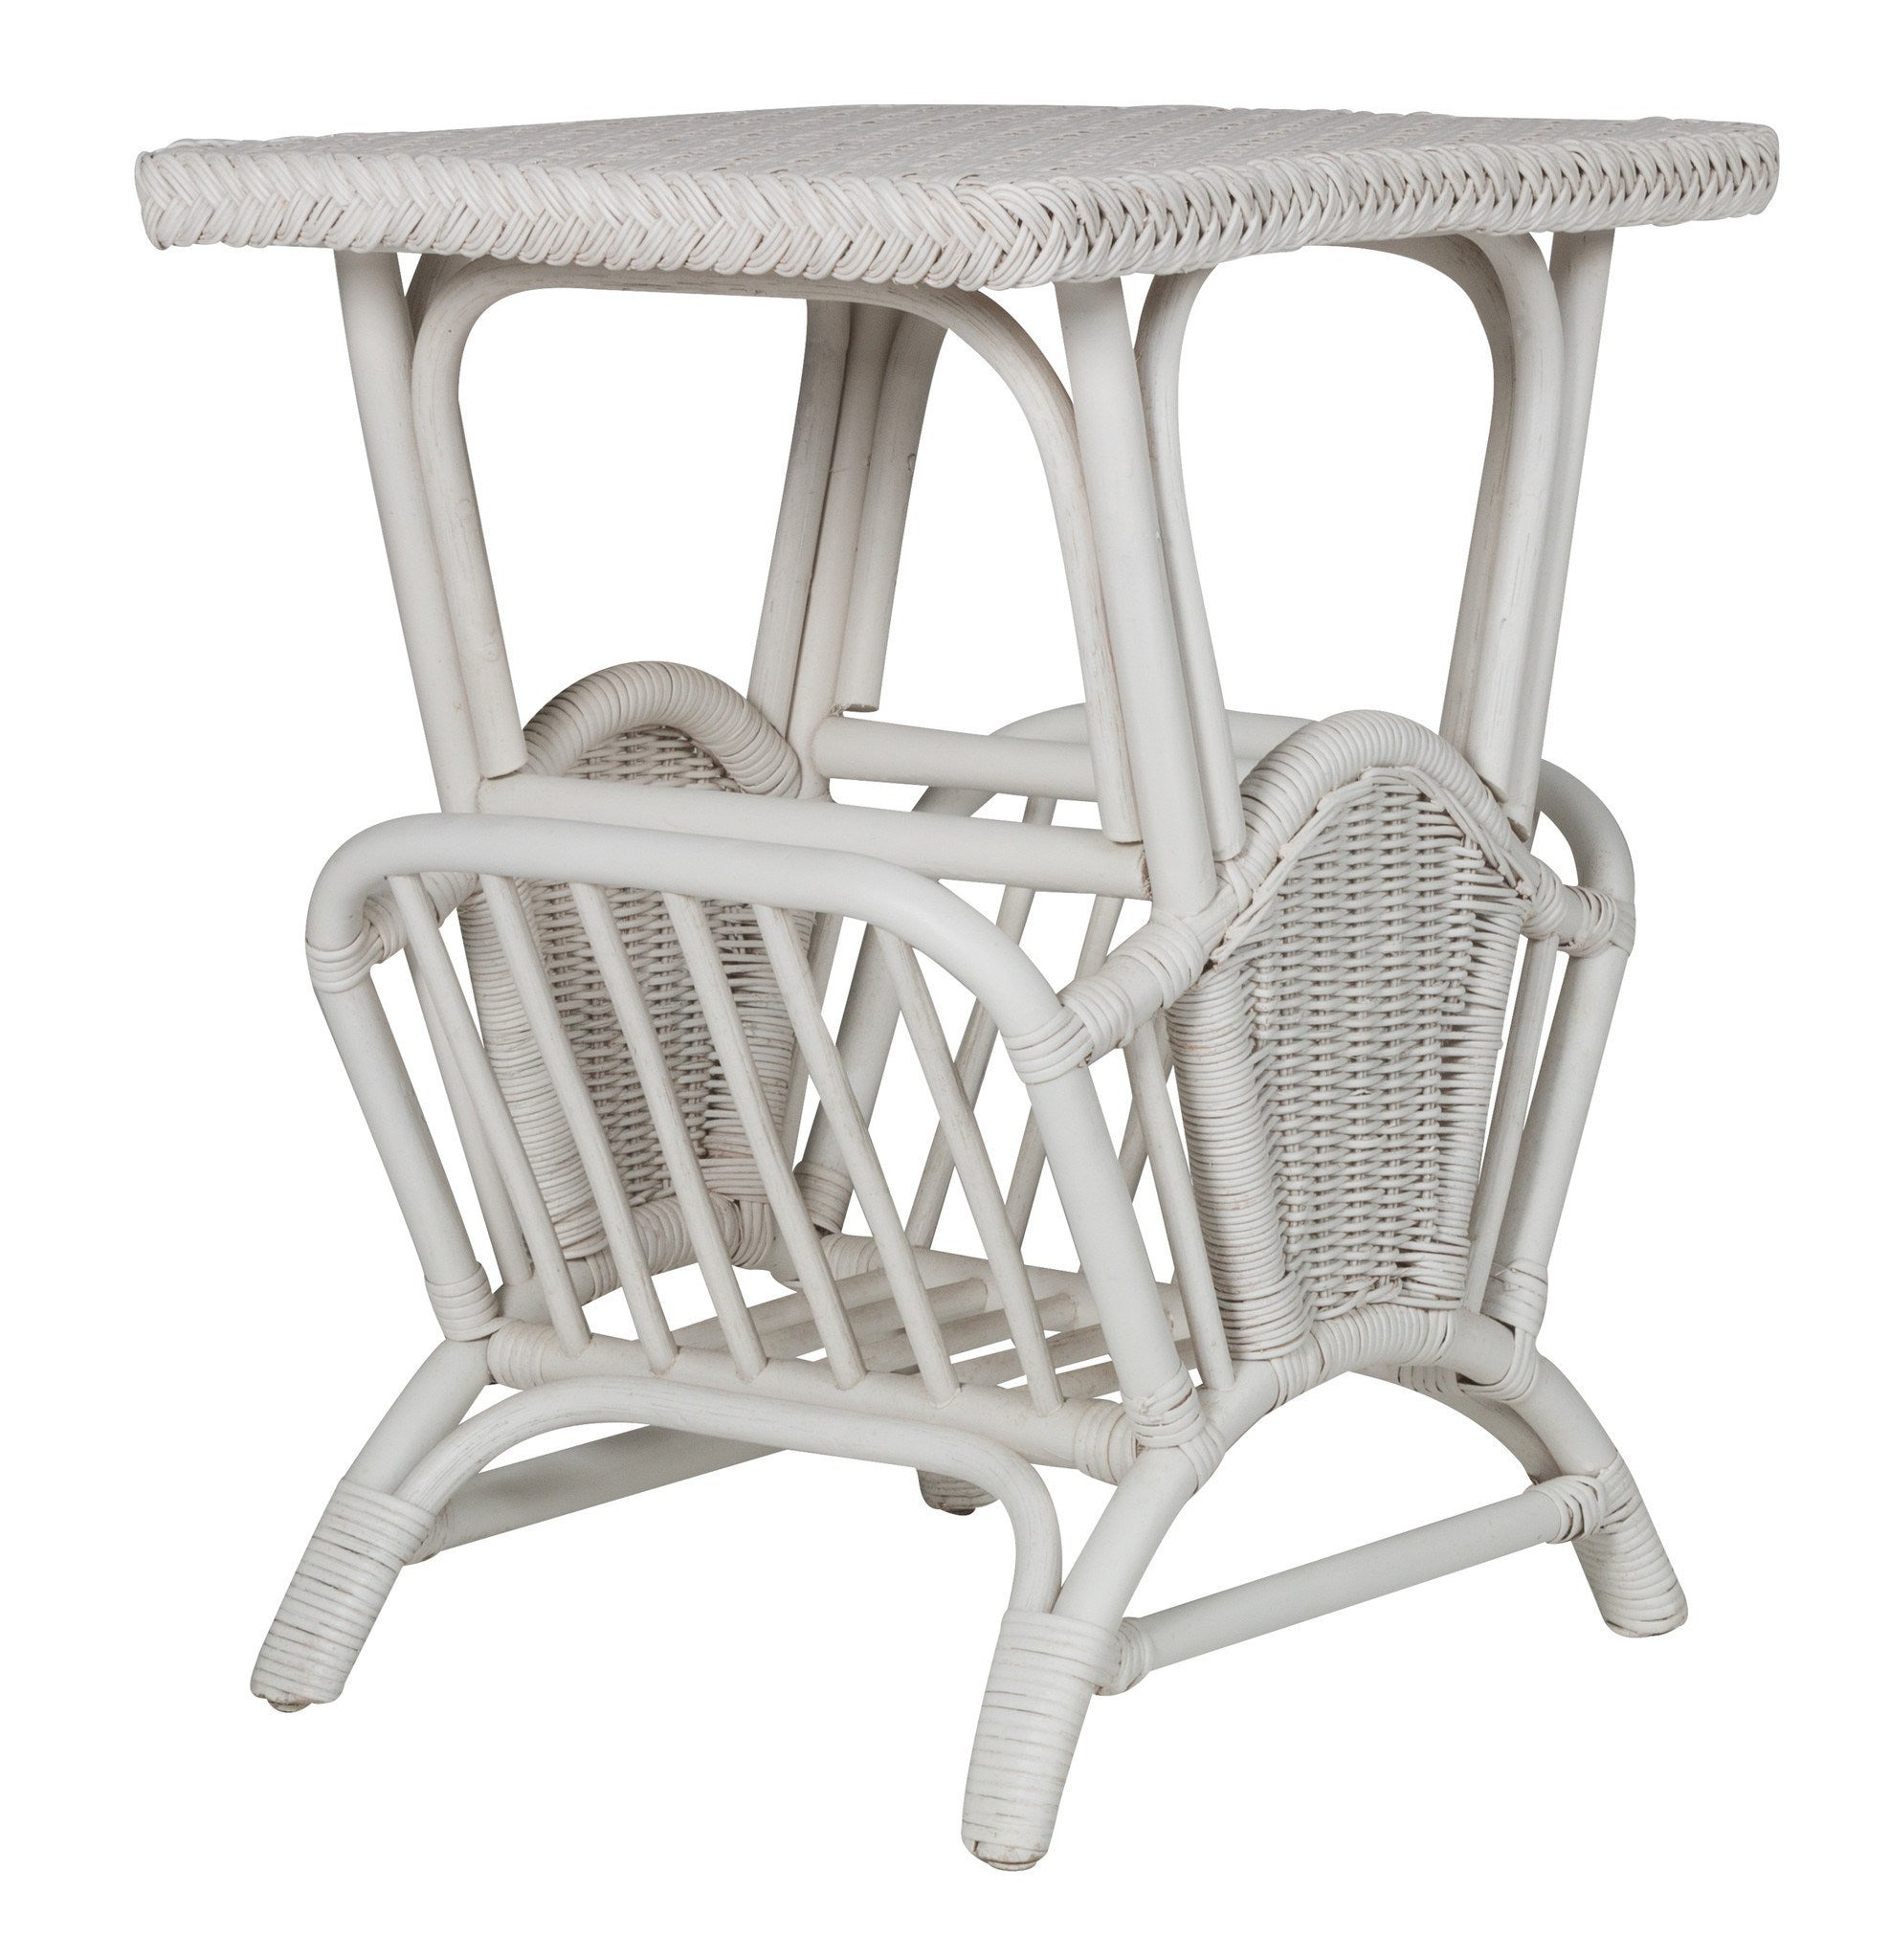 Designer Wicker & Rattan By Tribor Harbor Front Occasional Magazine Table Accessory - Rattan Imports